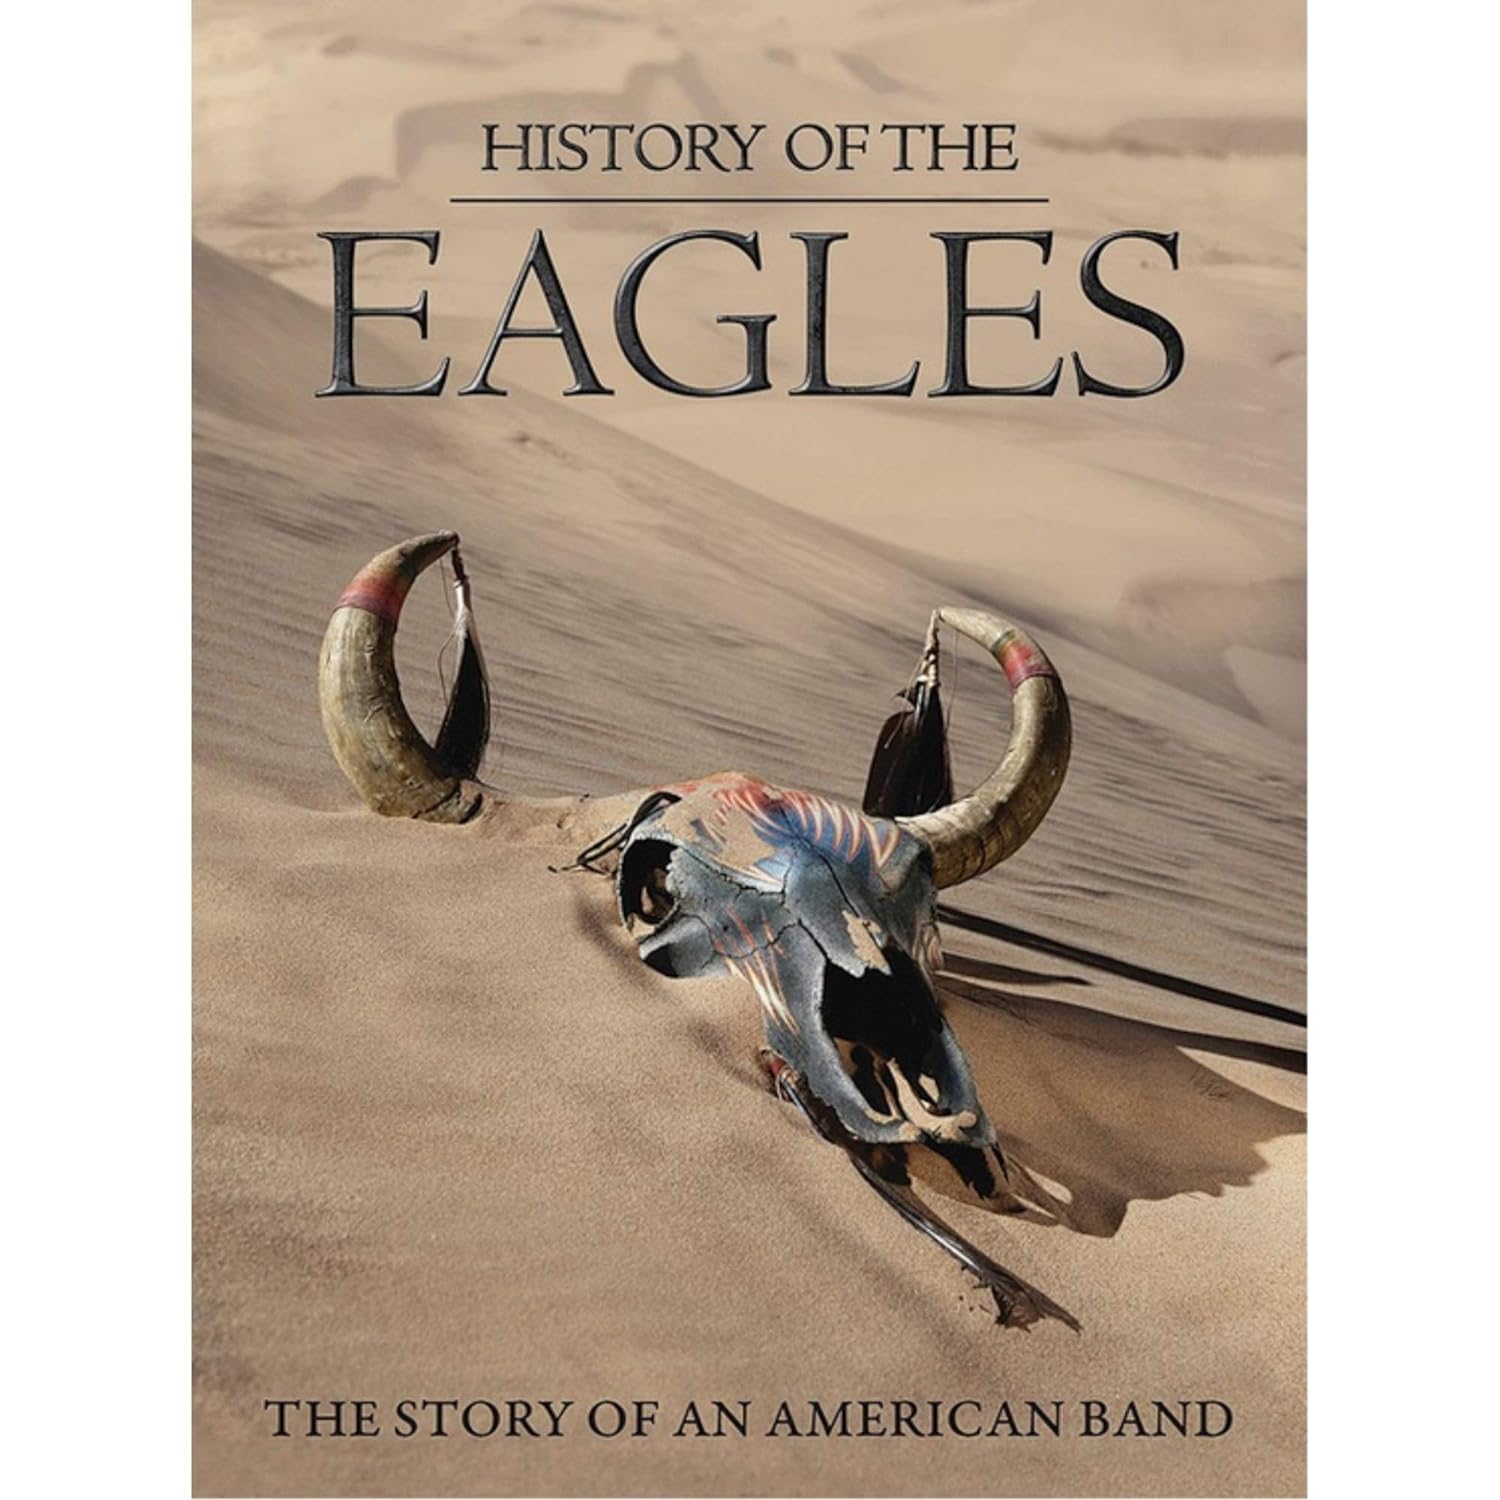 The Eagles- History Of The Eagles